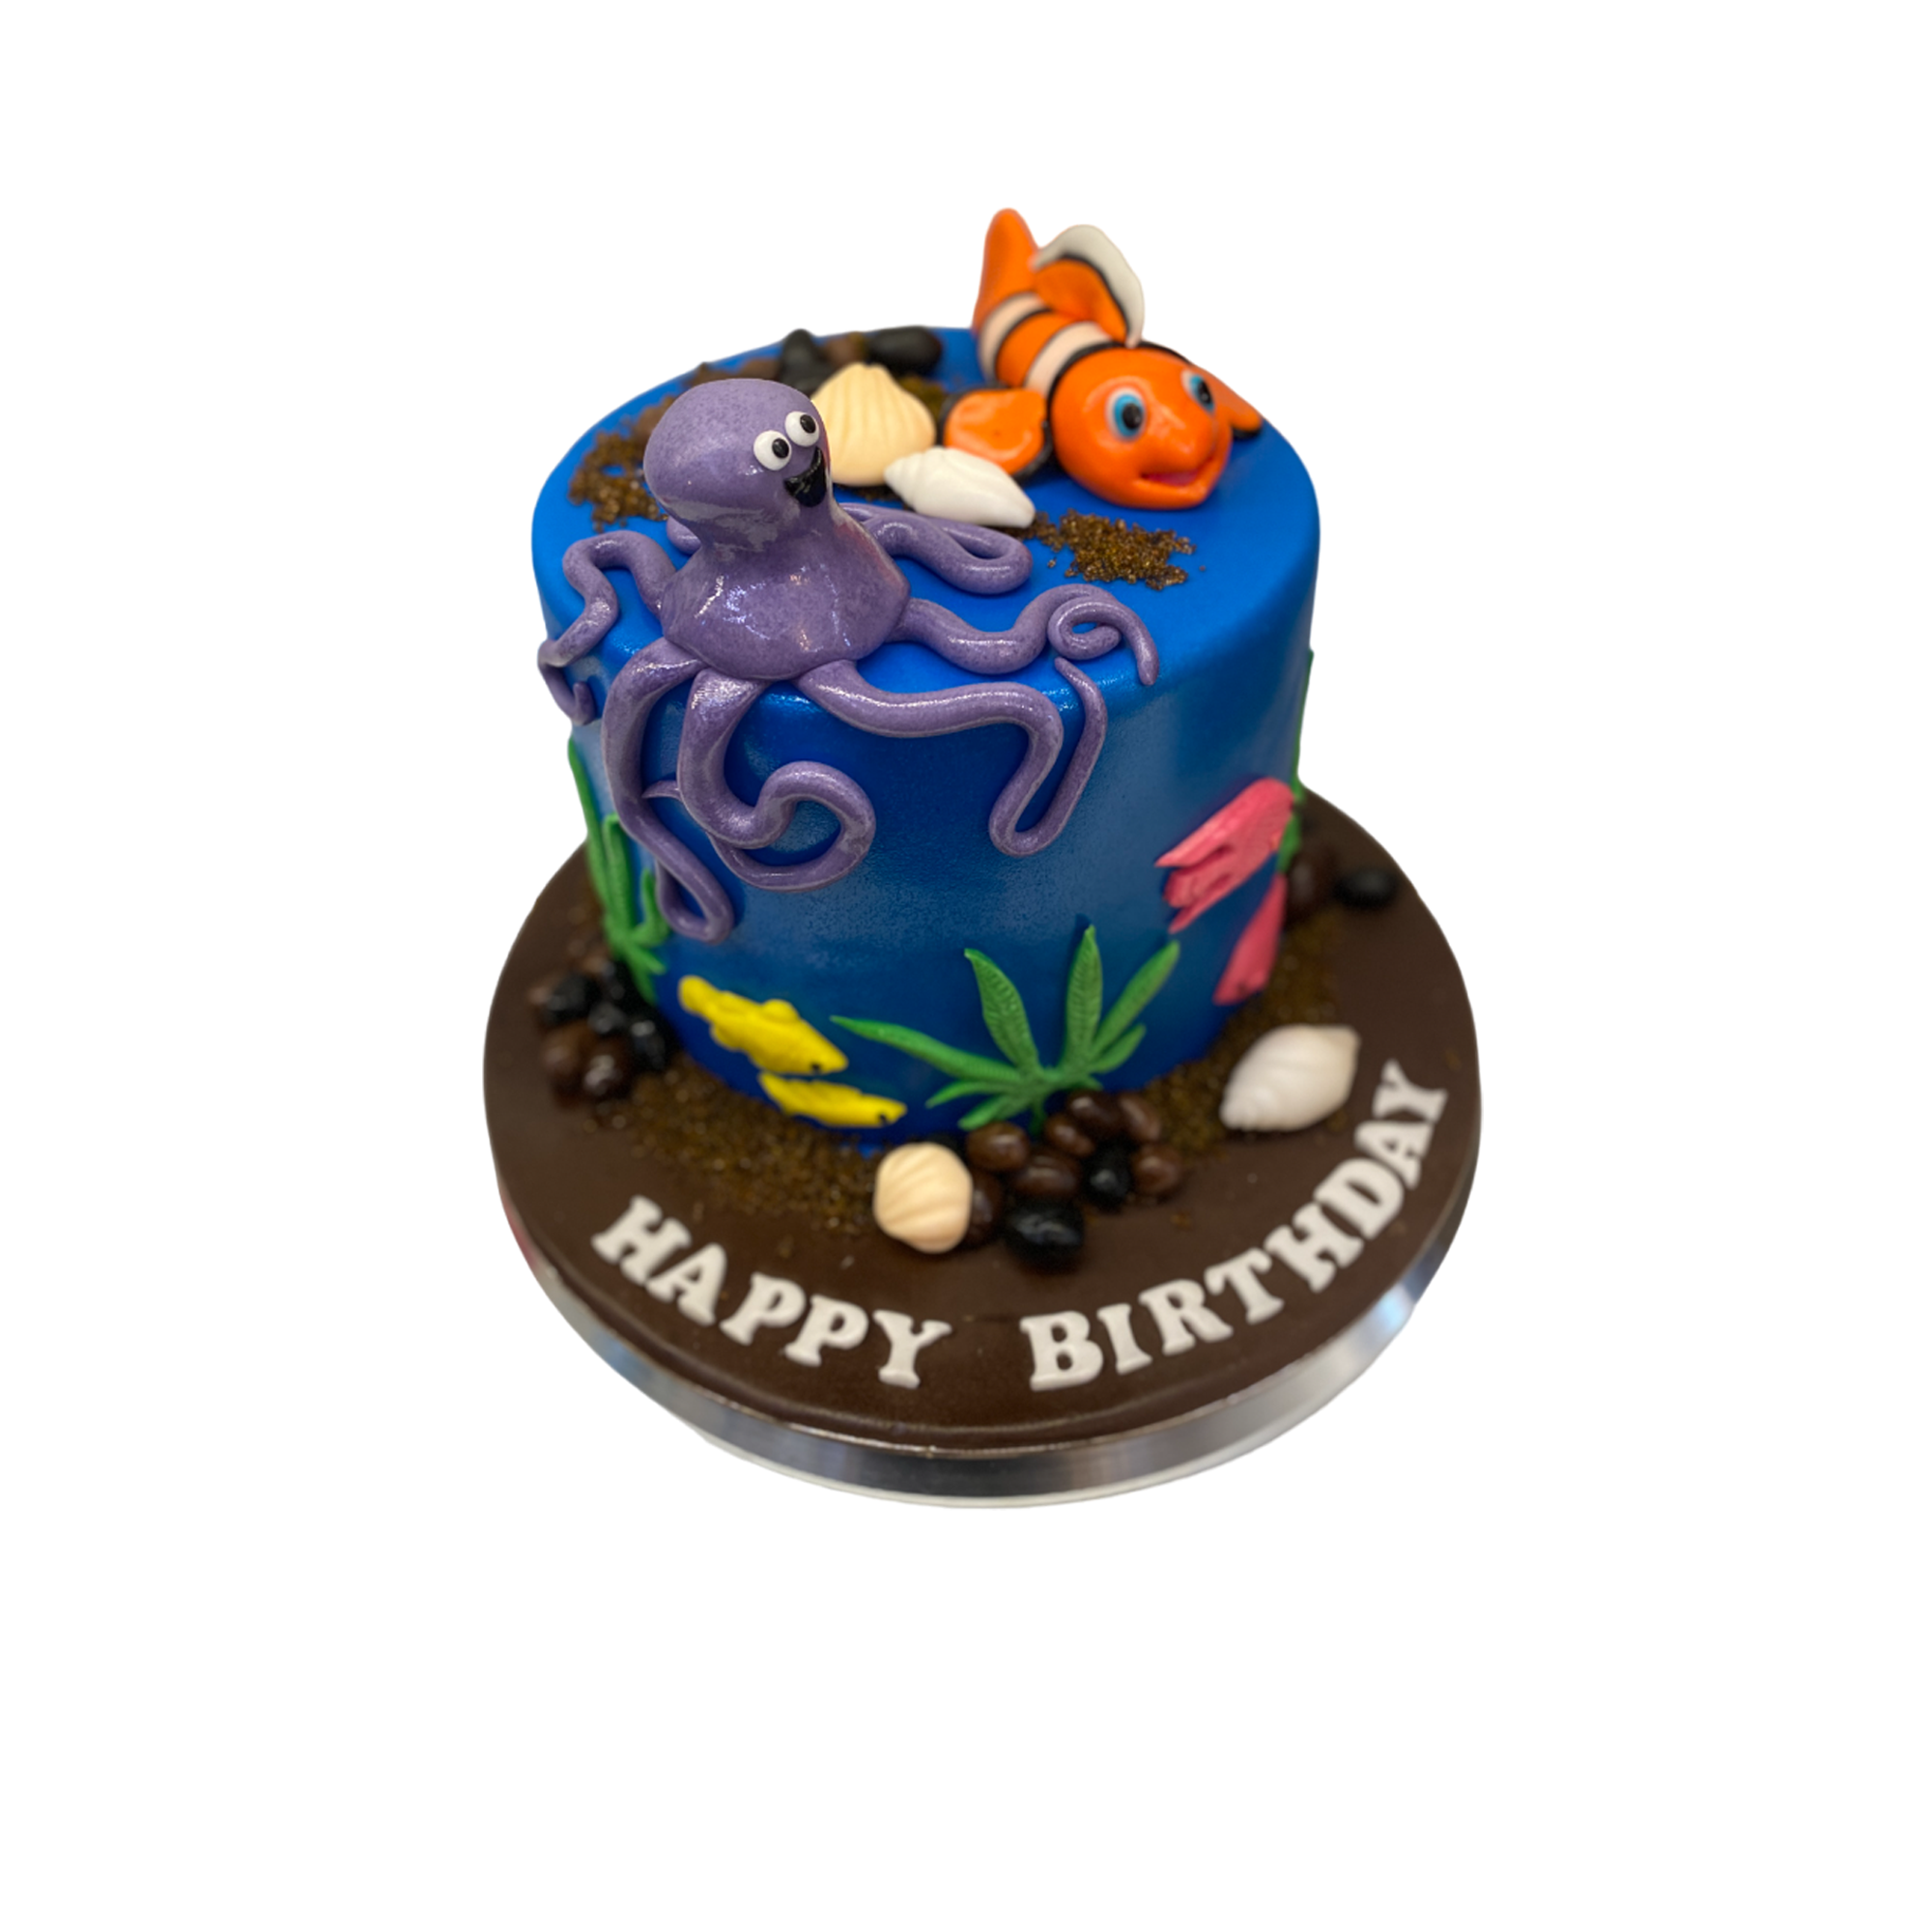 3D Cakes - Royal Delights